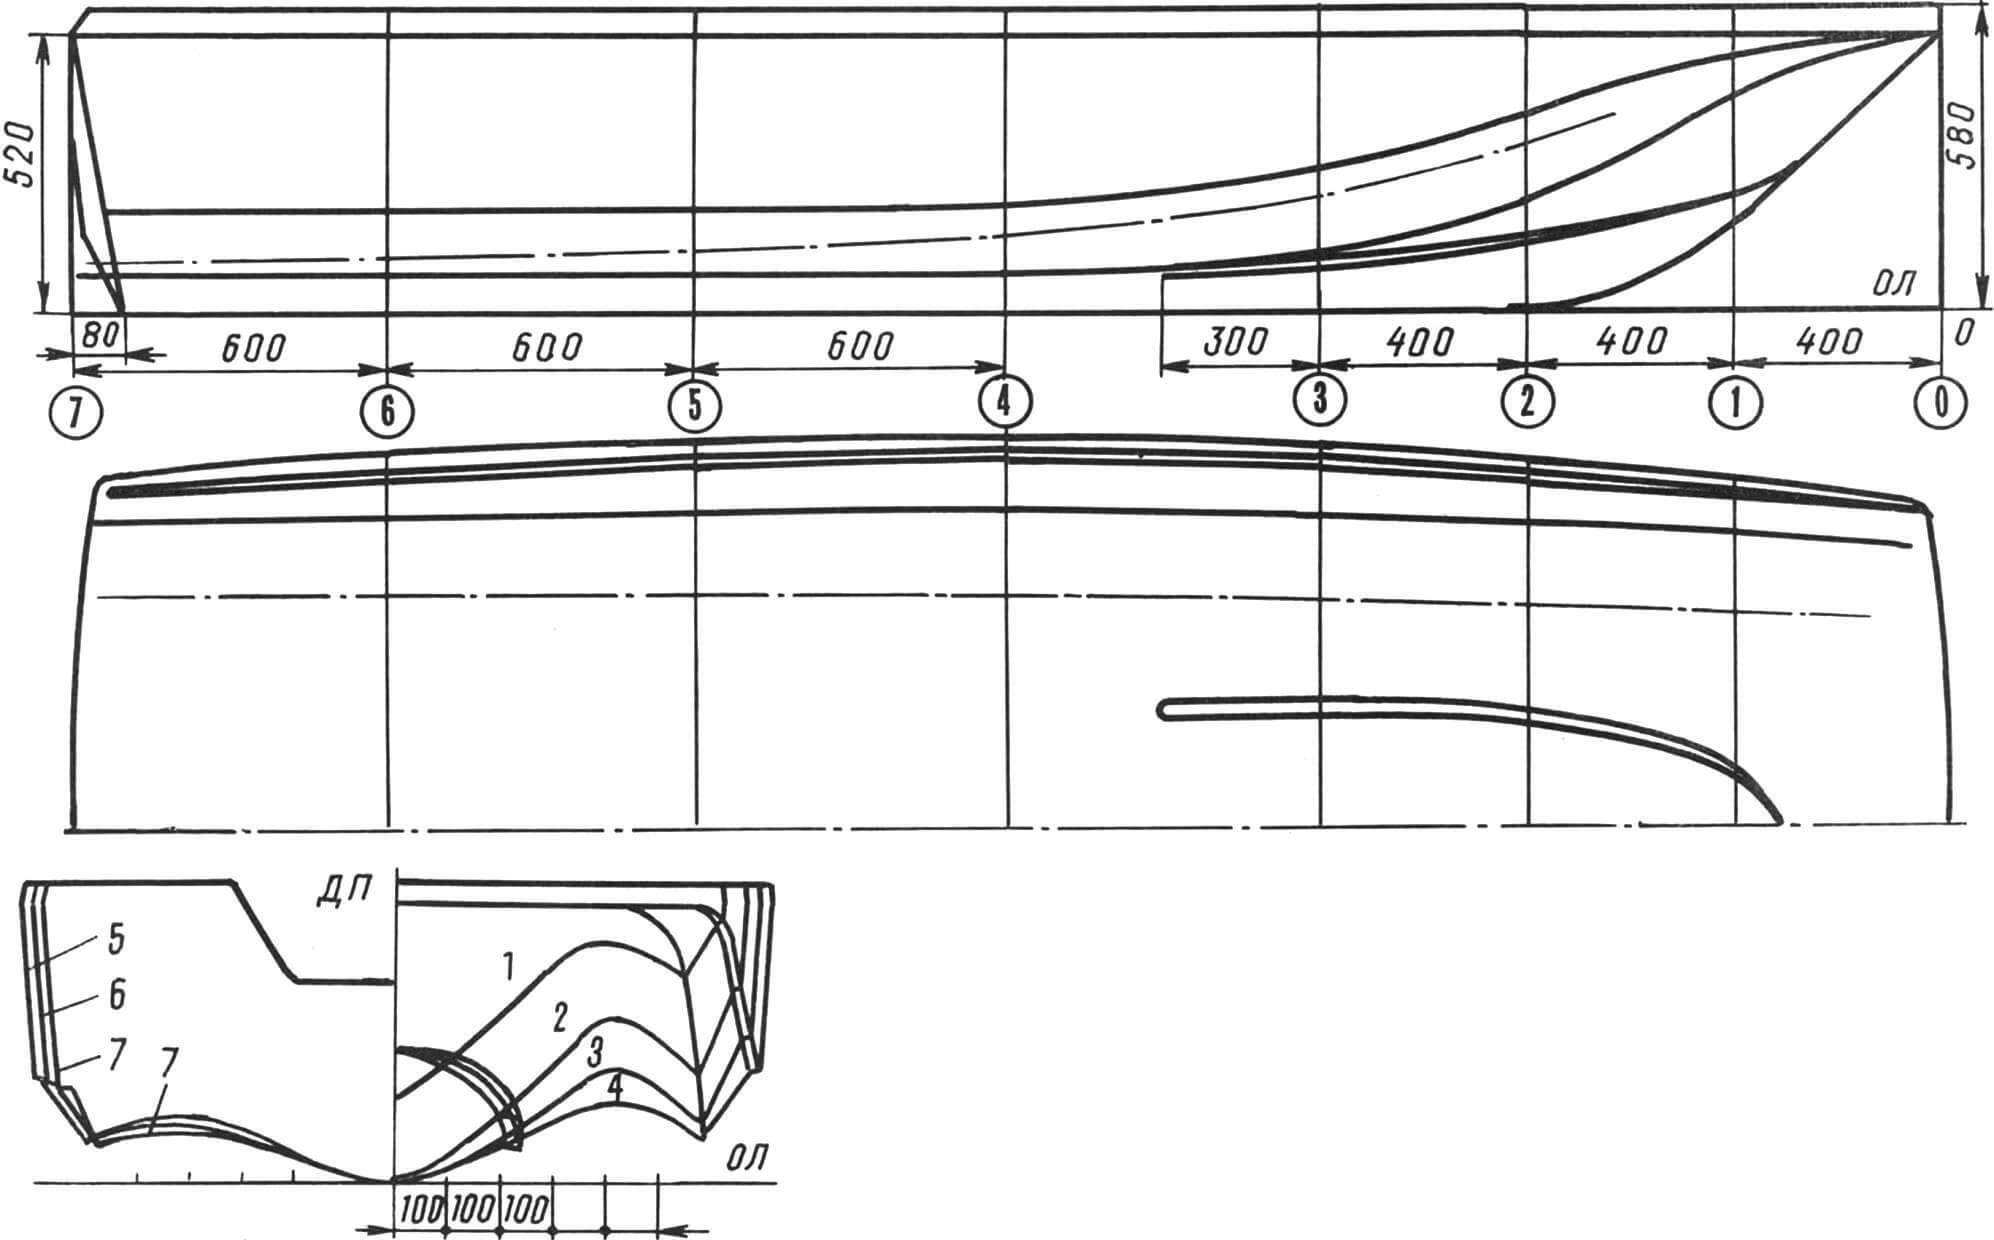 Fig. 2. Theoretical drawing of the boat's hull